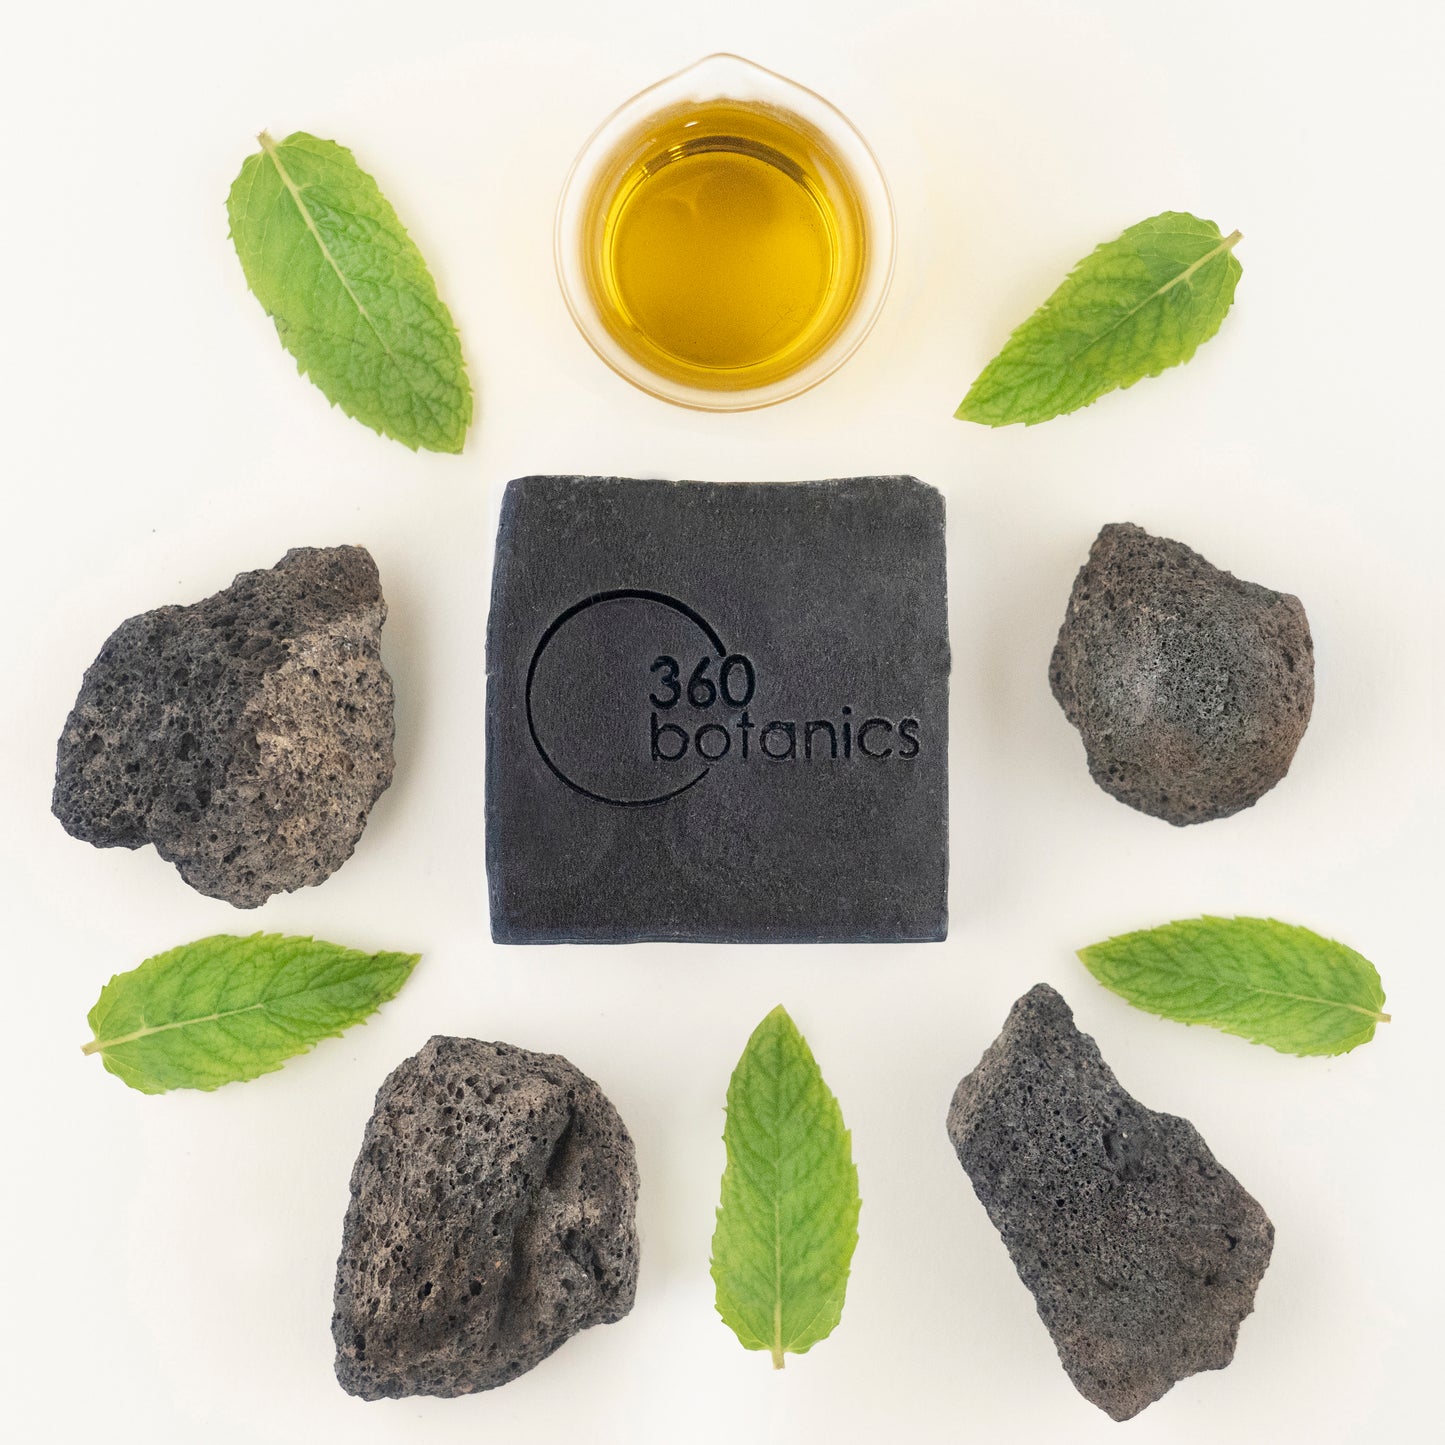 A top-down arrangement featuring a black 360 Botanics soap bar centered on a white background, surrounded by natural elements: fresh green leaves, volcanic rocks, and a small bowl of golden oil, creating a harmonious blend of textures and colors that emphasize the organic and earthy essence of the products